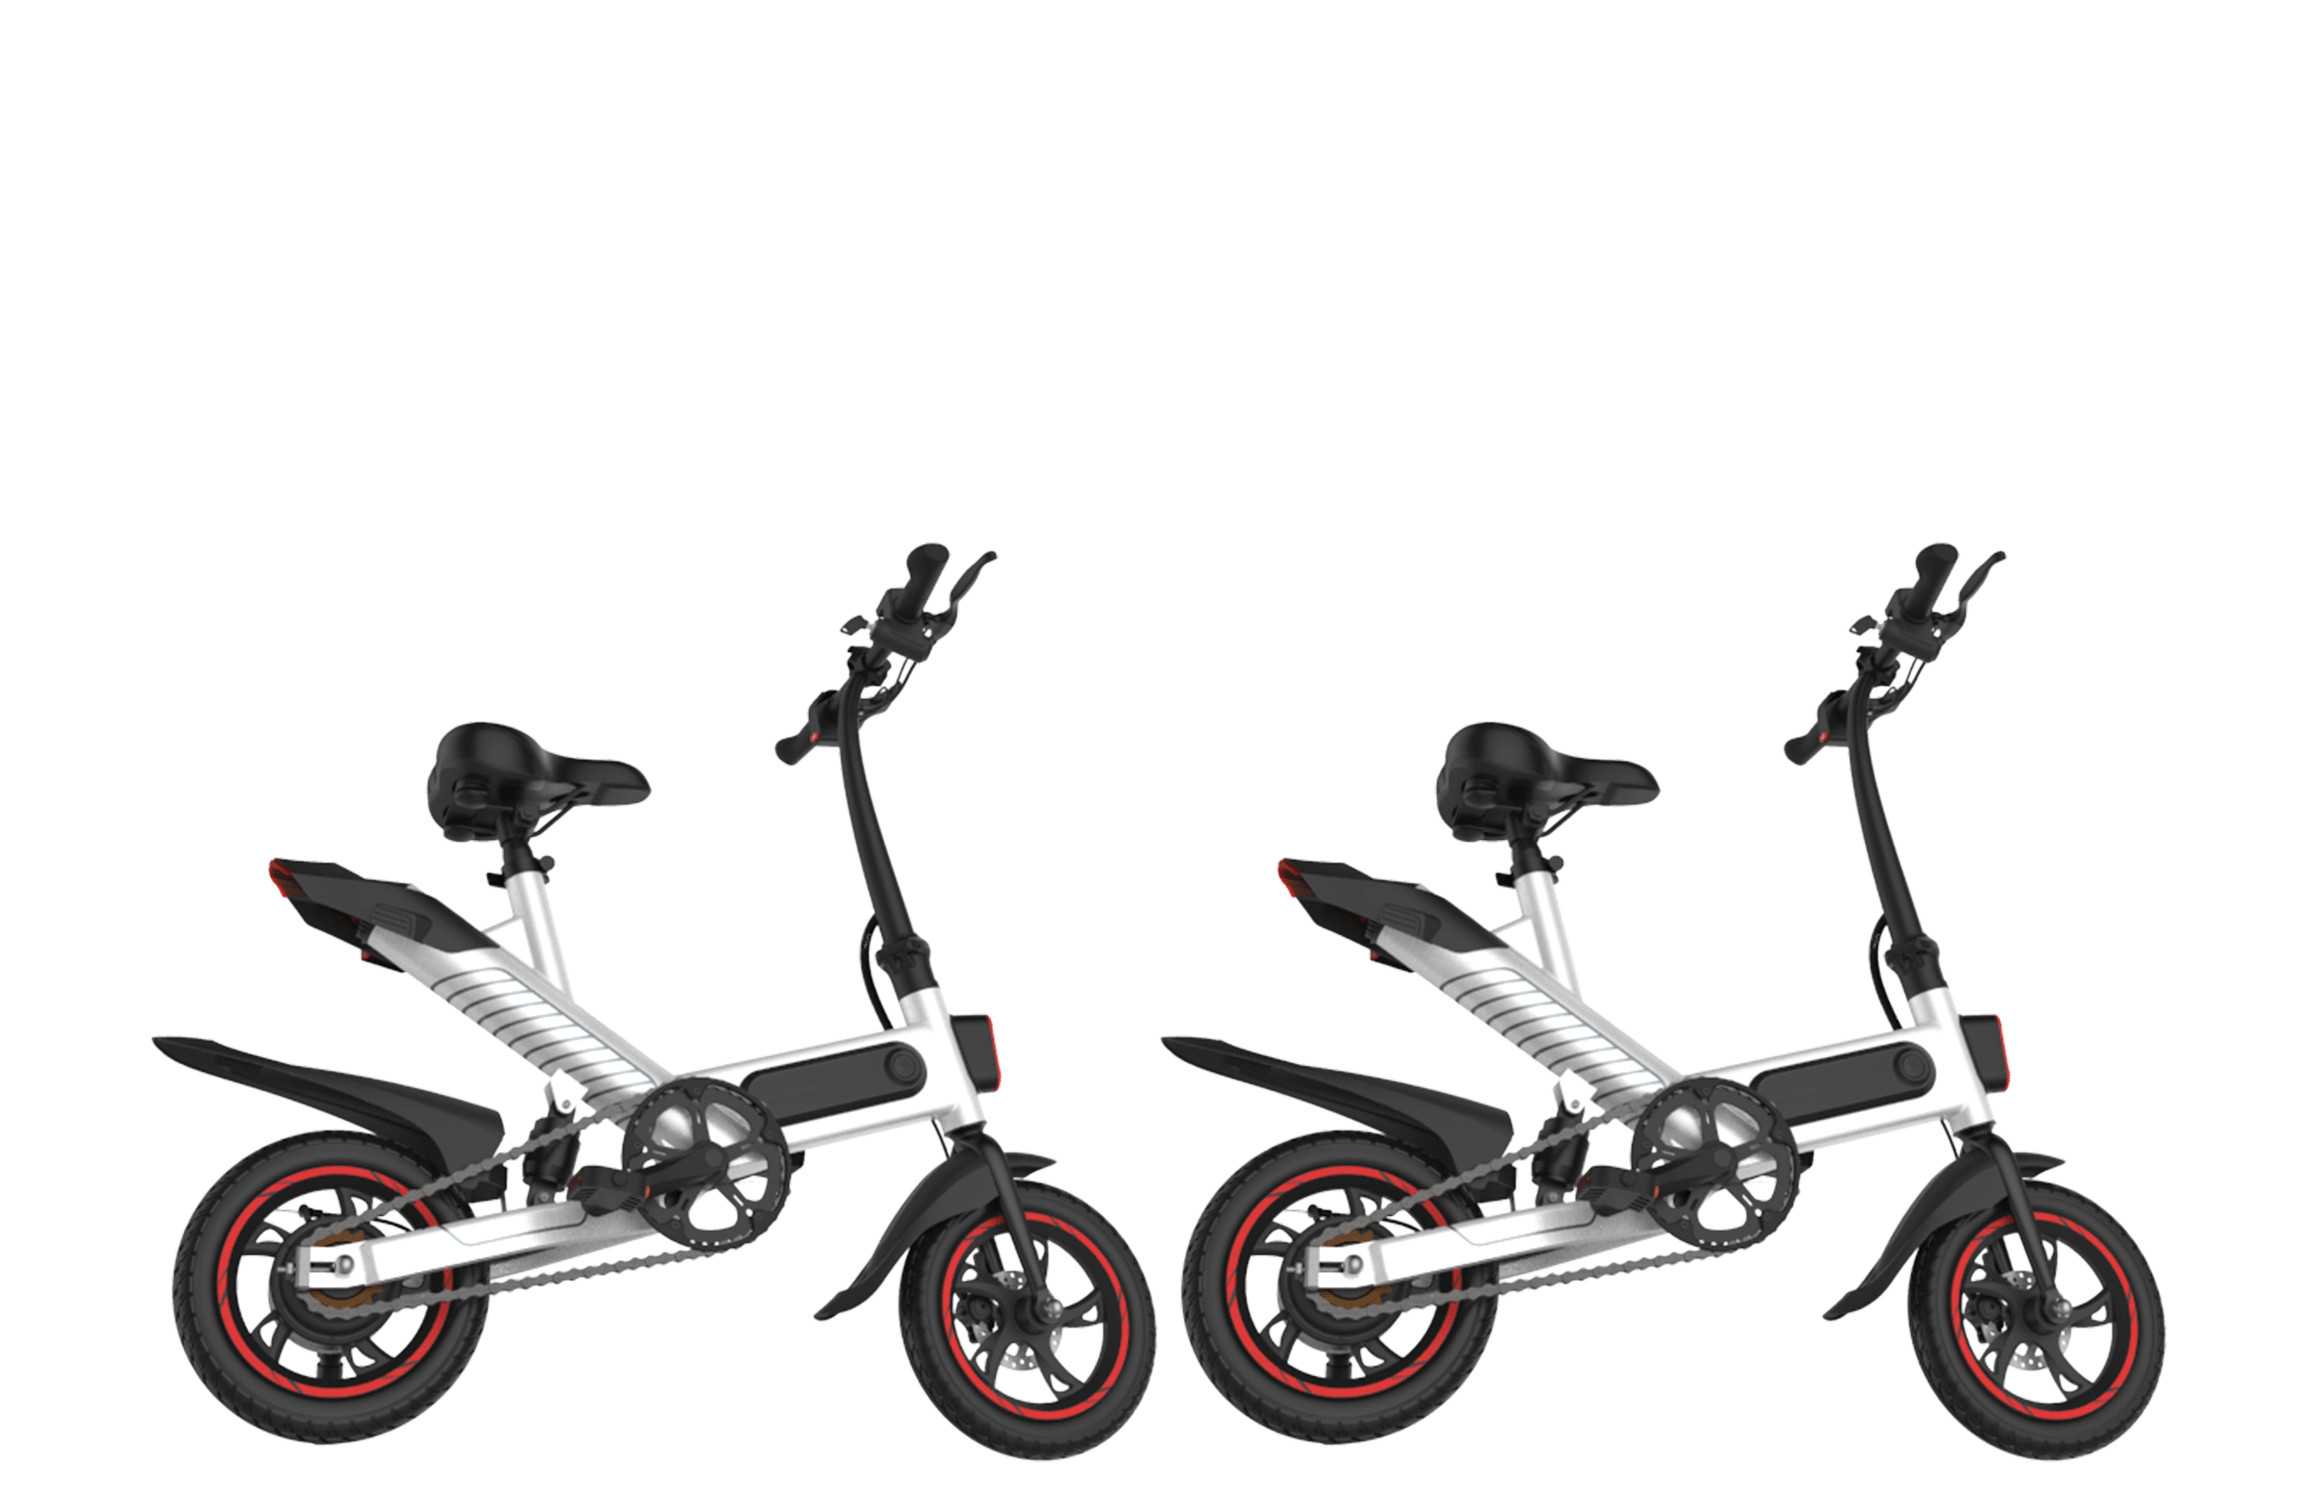 Best 12 Inch Leisure Portable Foldable Electric Bicycle Aluminum Alloy Frame wholesale